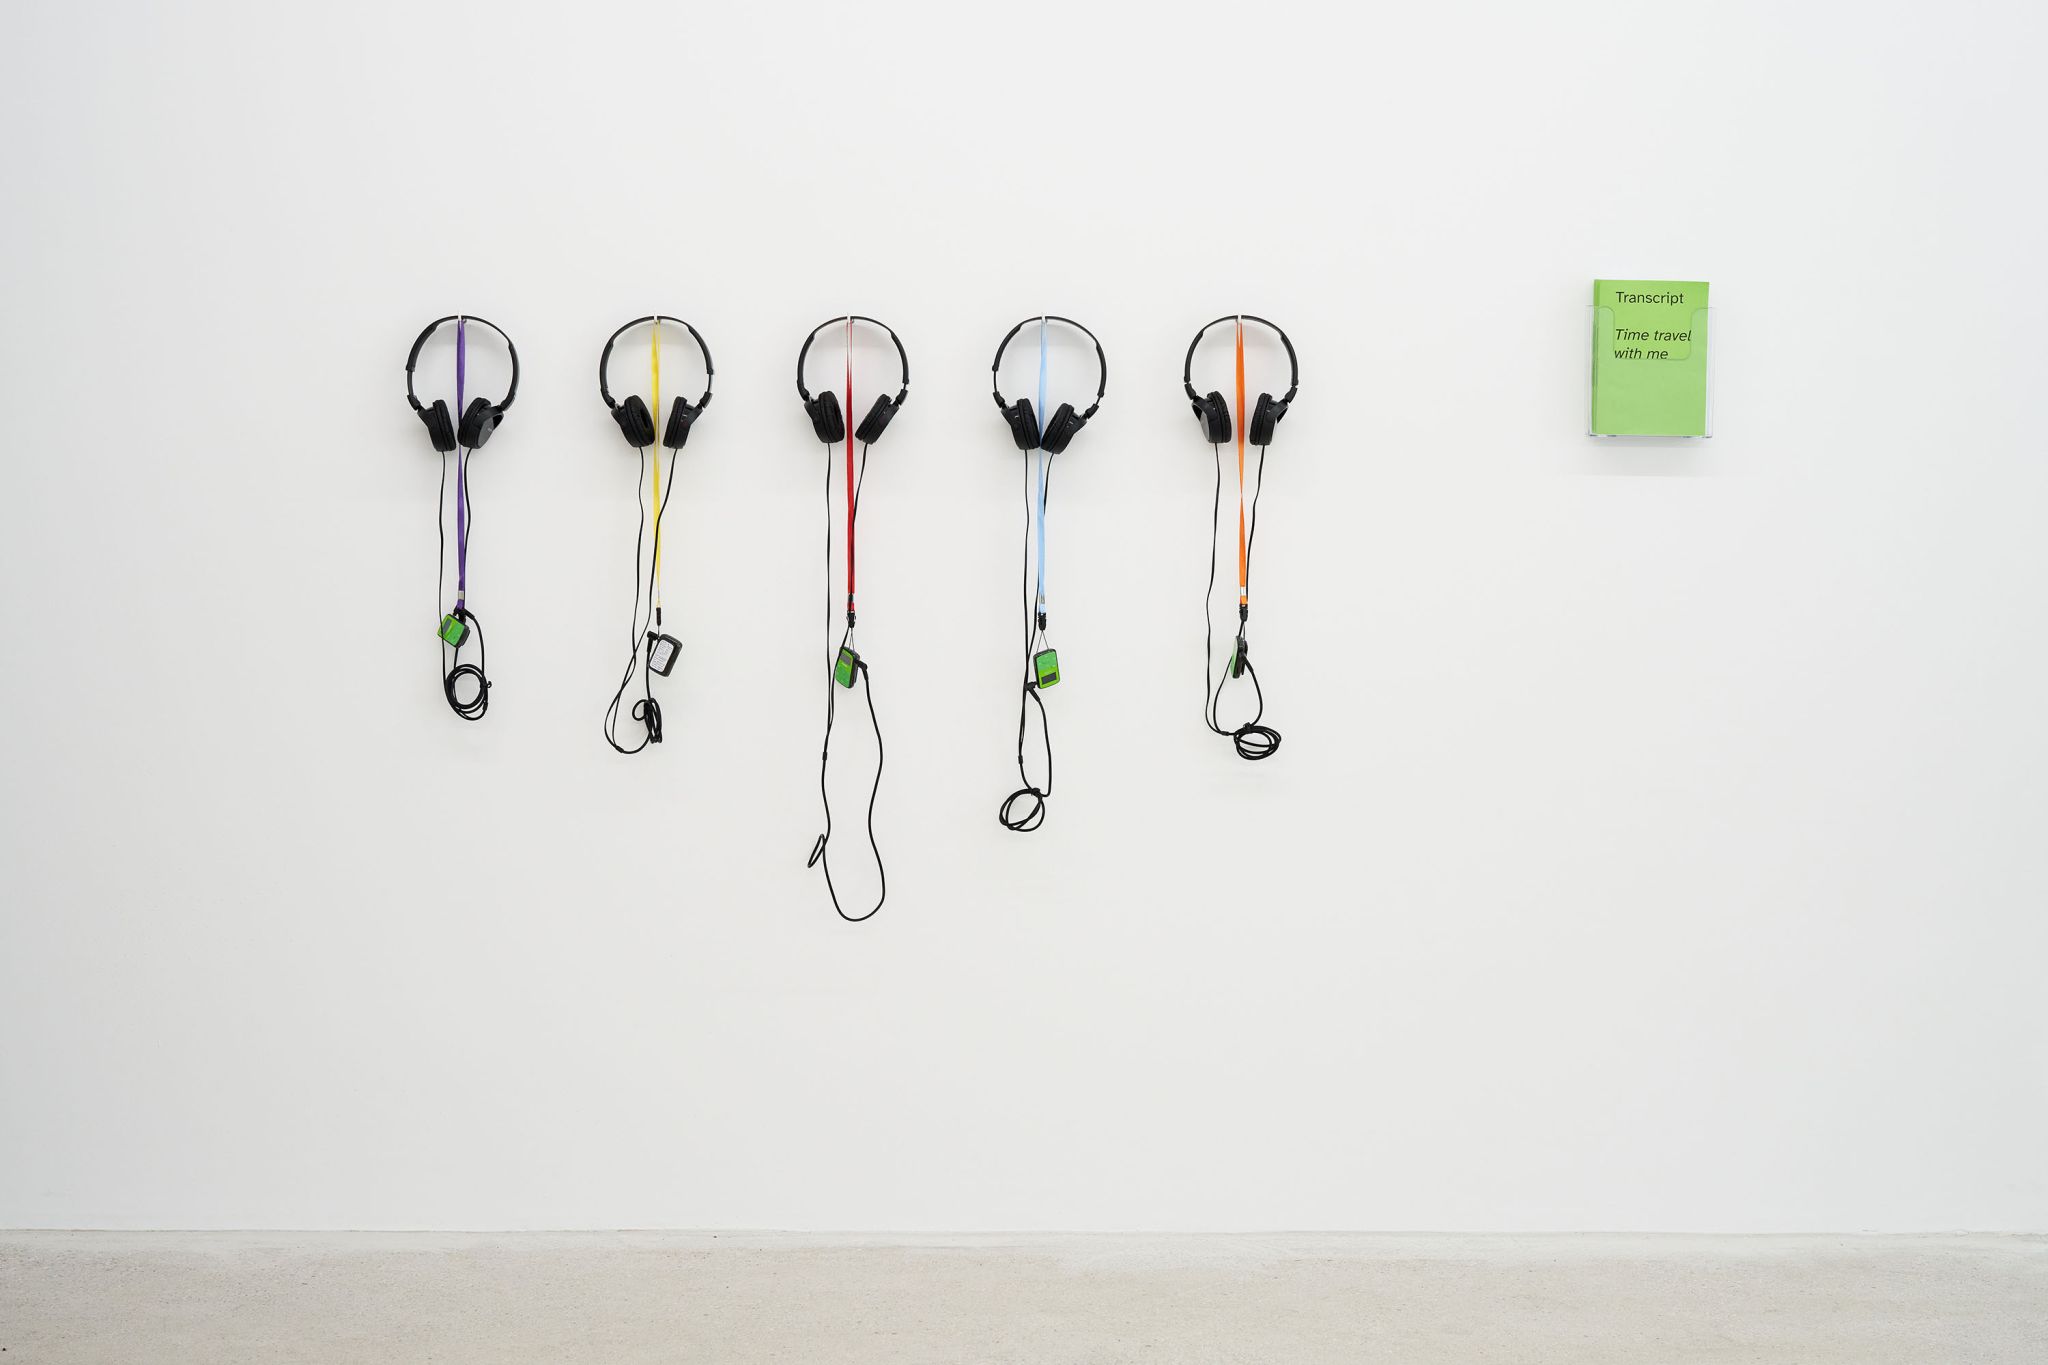 Finnegan Shannon, Time travel with me, 2022, Audio, mp3-Player, lanyard, headphones, transcript, zine, Image description: Five headphones plugged into mp3 players are hanging on a wall. Next to them a zine with a bright green cover. On it, it says “Transcript” and “Time travel with me.”